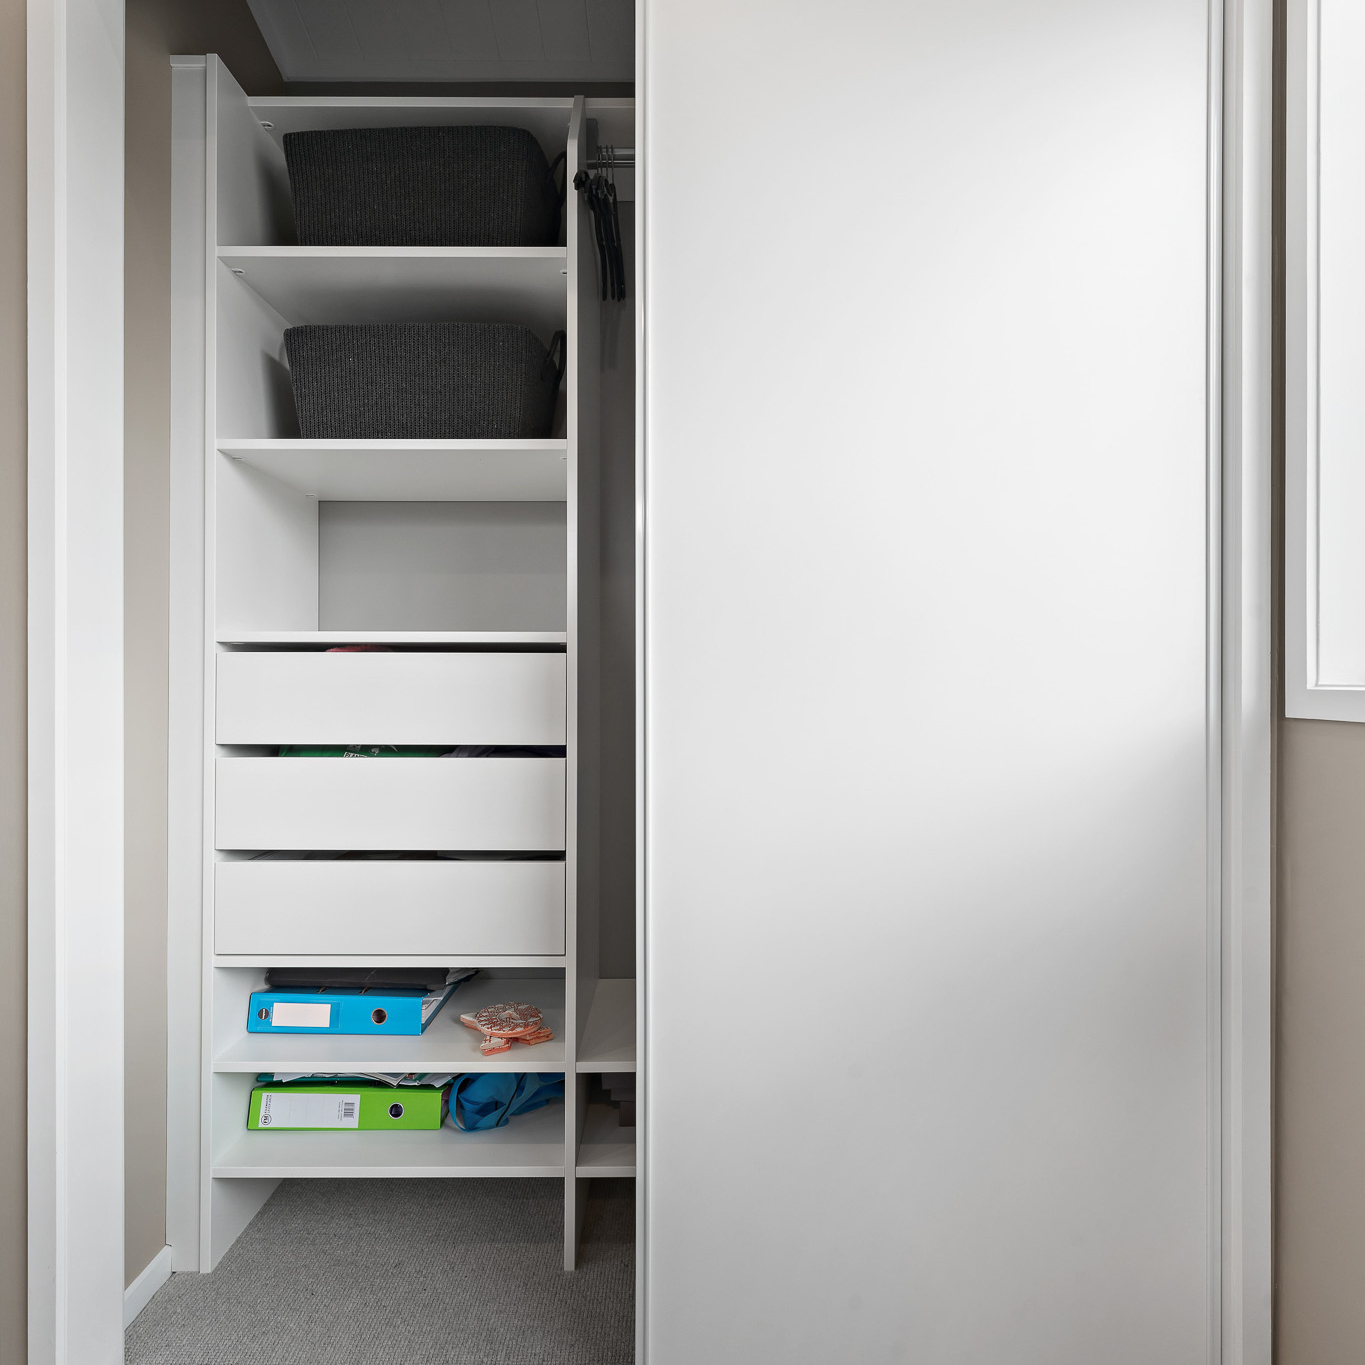 White Flex Wardrobe organiser with Aristo sliding wardrobe doors, doors are open and you can see inside the wardrobe